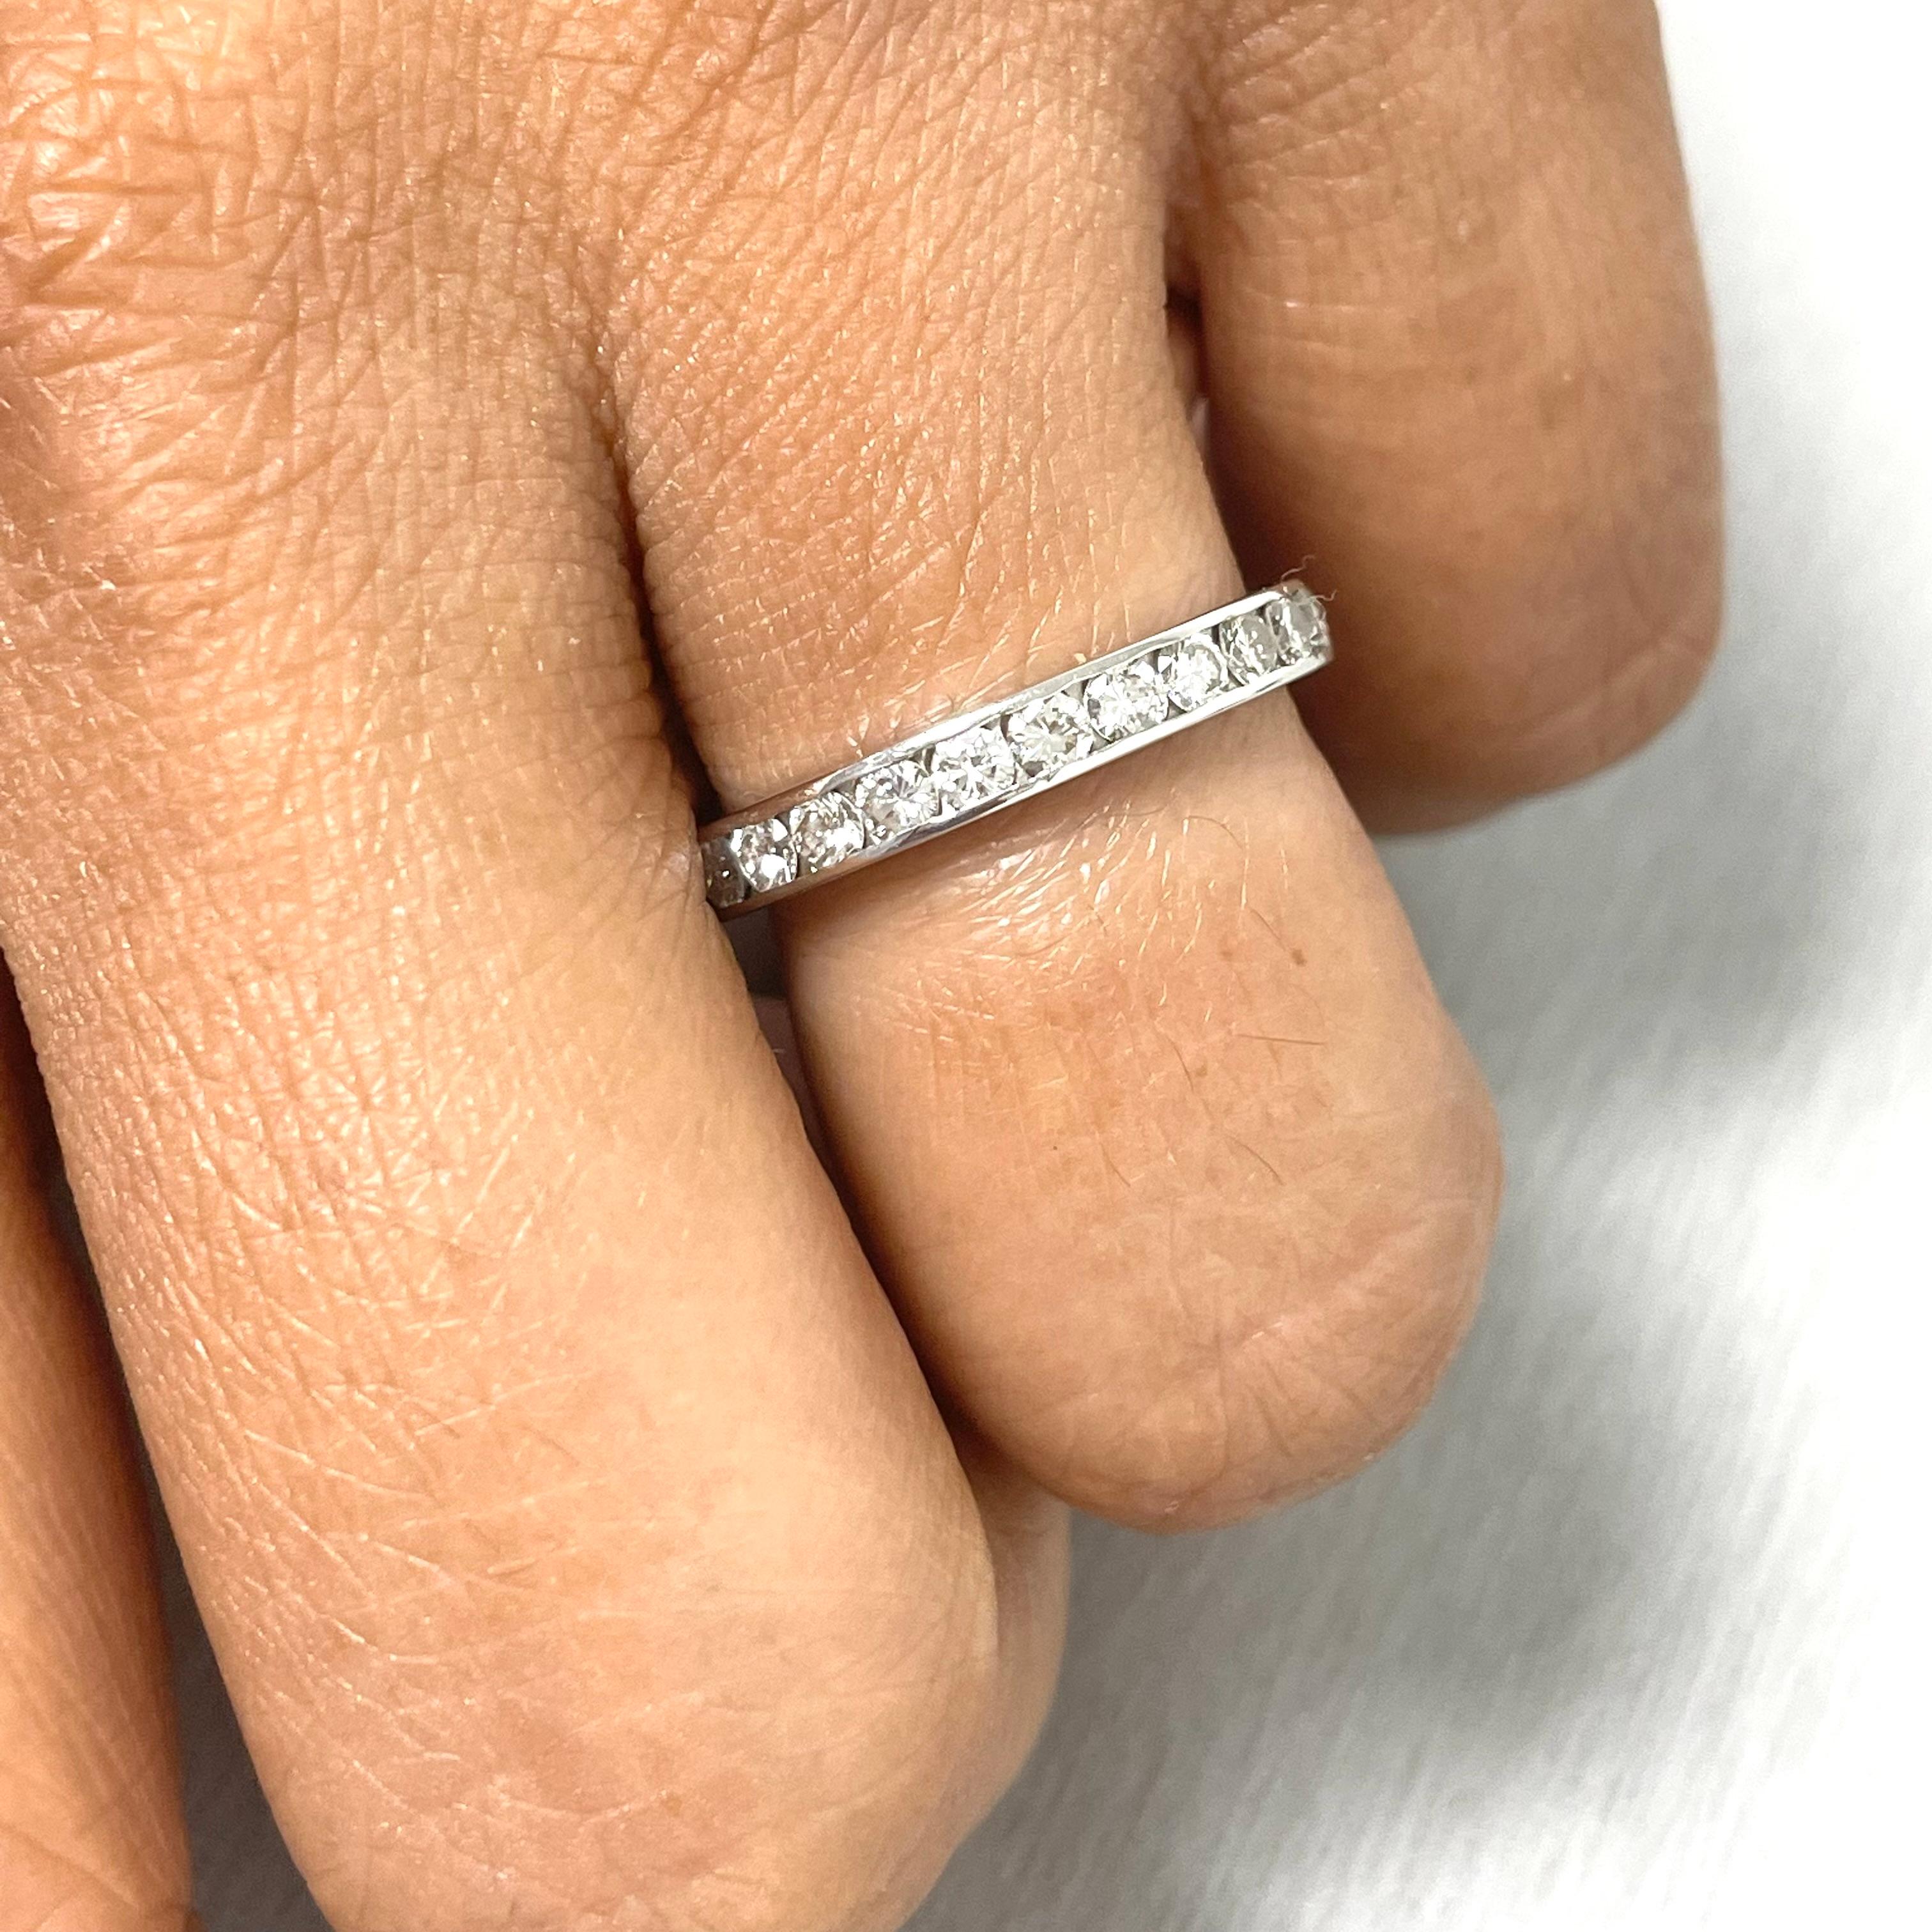 The channel set eternity diamond band offers both the bling and a charisma that is slightly subdued. A classic style, it is comfortable and evergreen.

Total Diamond Weight: 1.30 ct
No. of Diamonds: 26
Diamond Color: G - H
Diamond Clarity: VS (Very